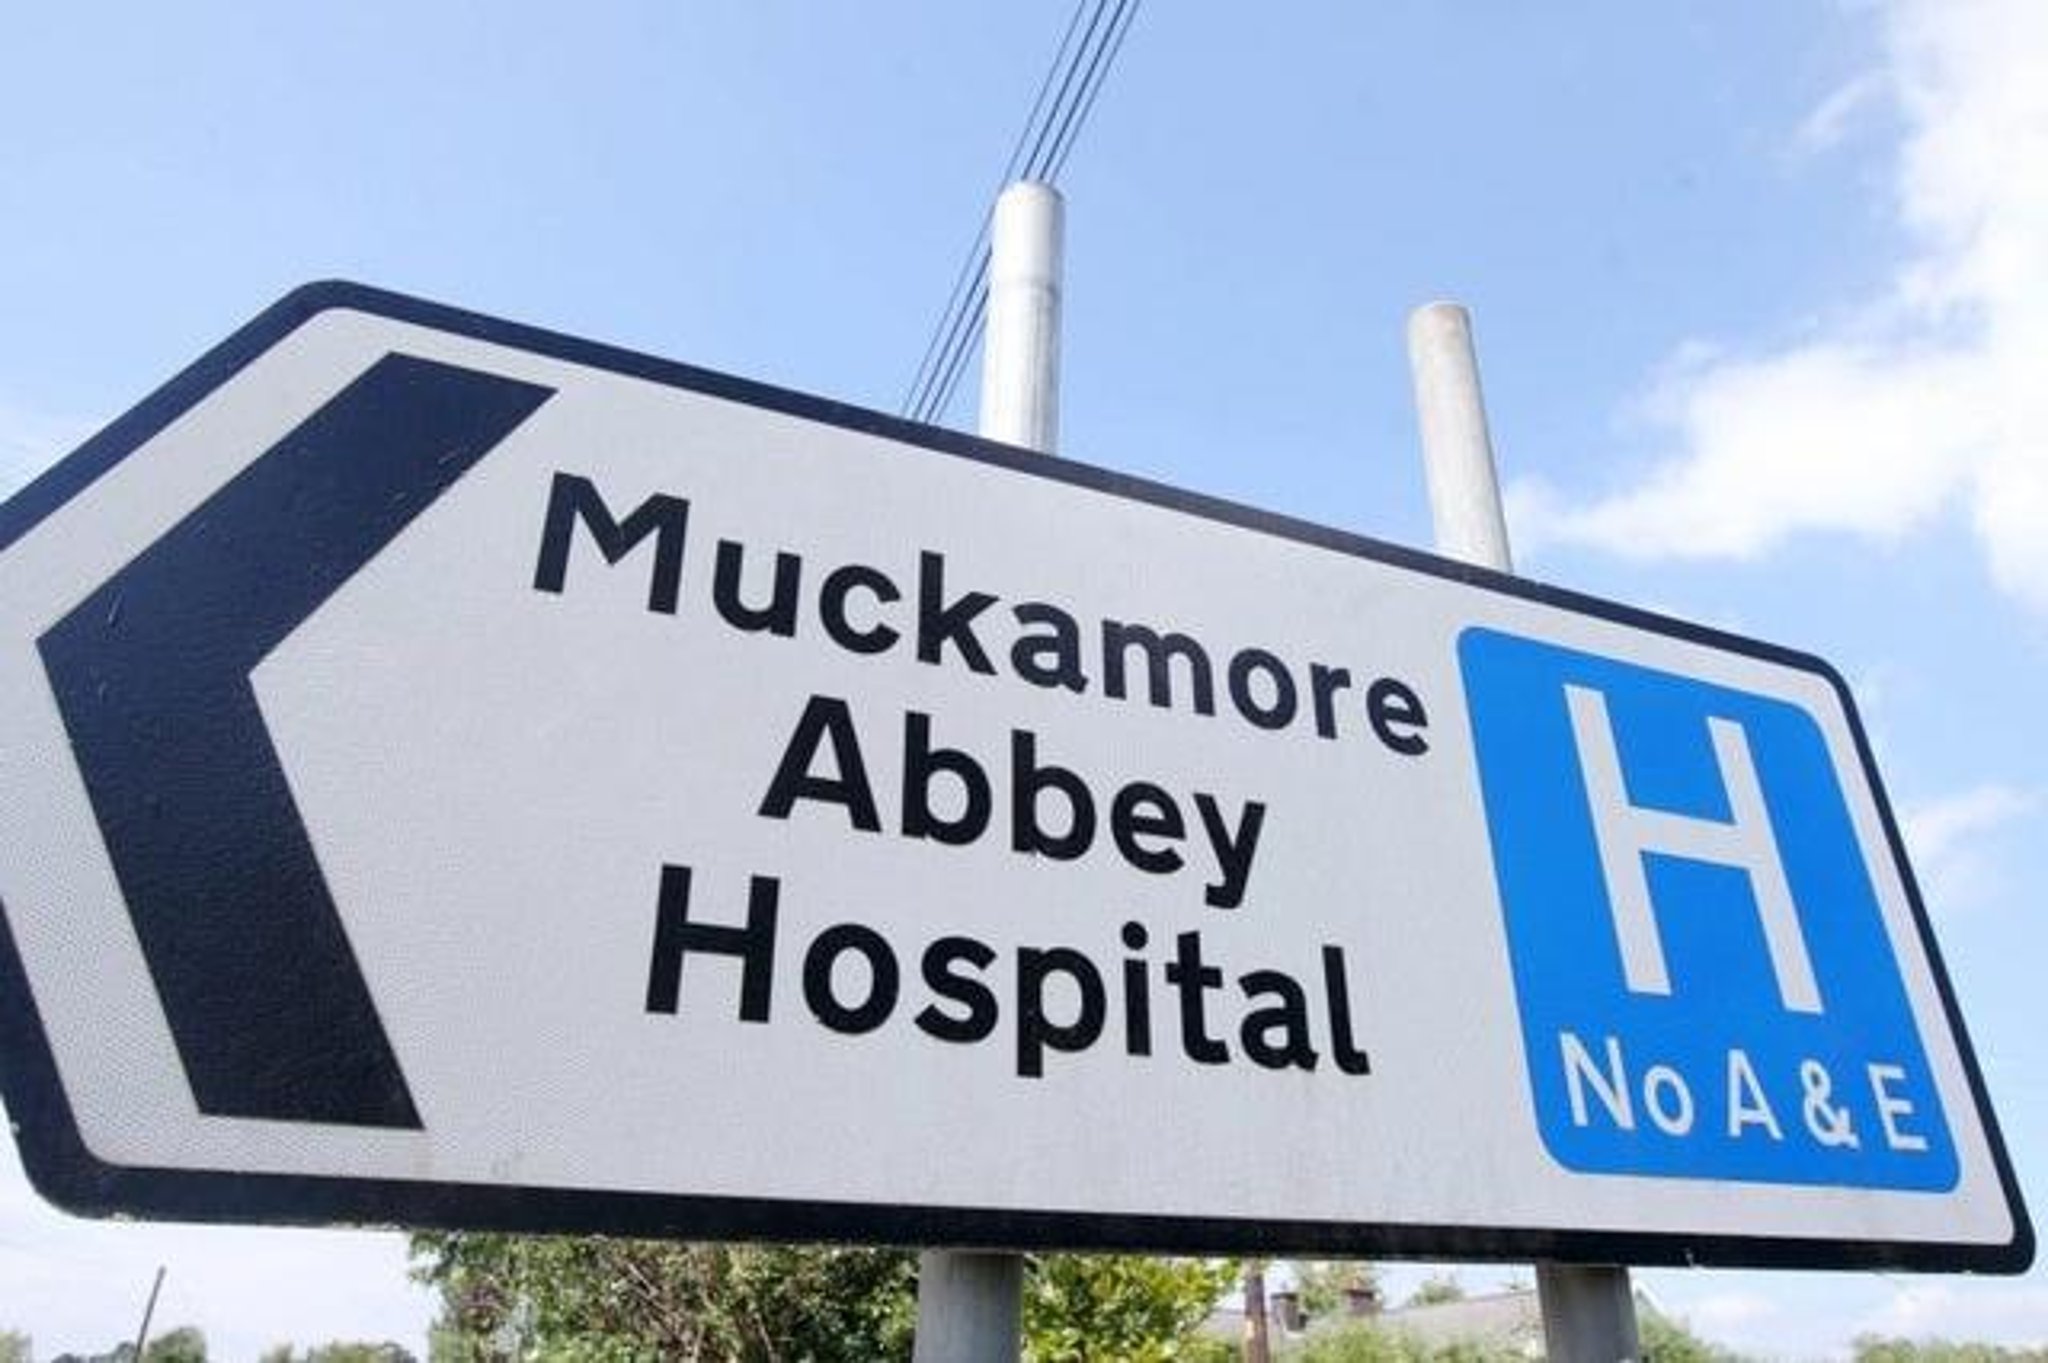 Another male arrested this morning in Muckamore Abbey Hospital investigation